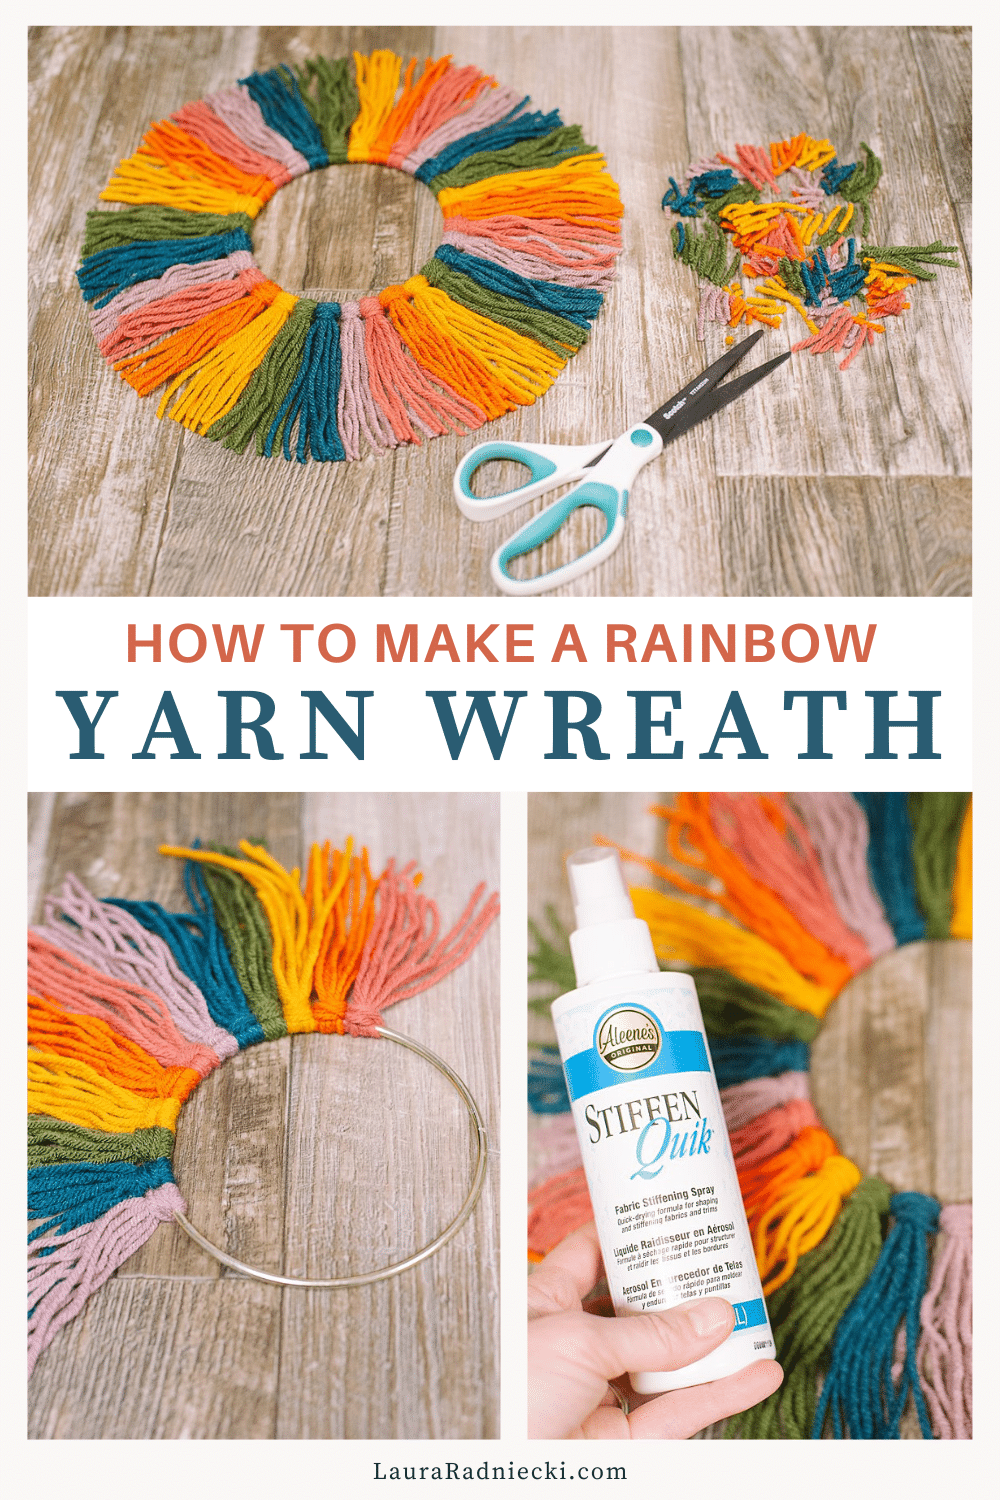 How to Make a Wreath out of Rainbow Yarn | How to Make a Rainbow Yarn Wreath